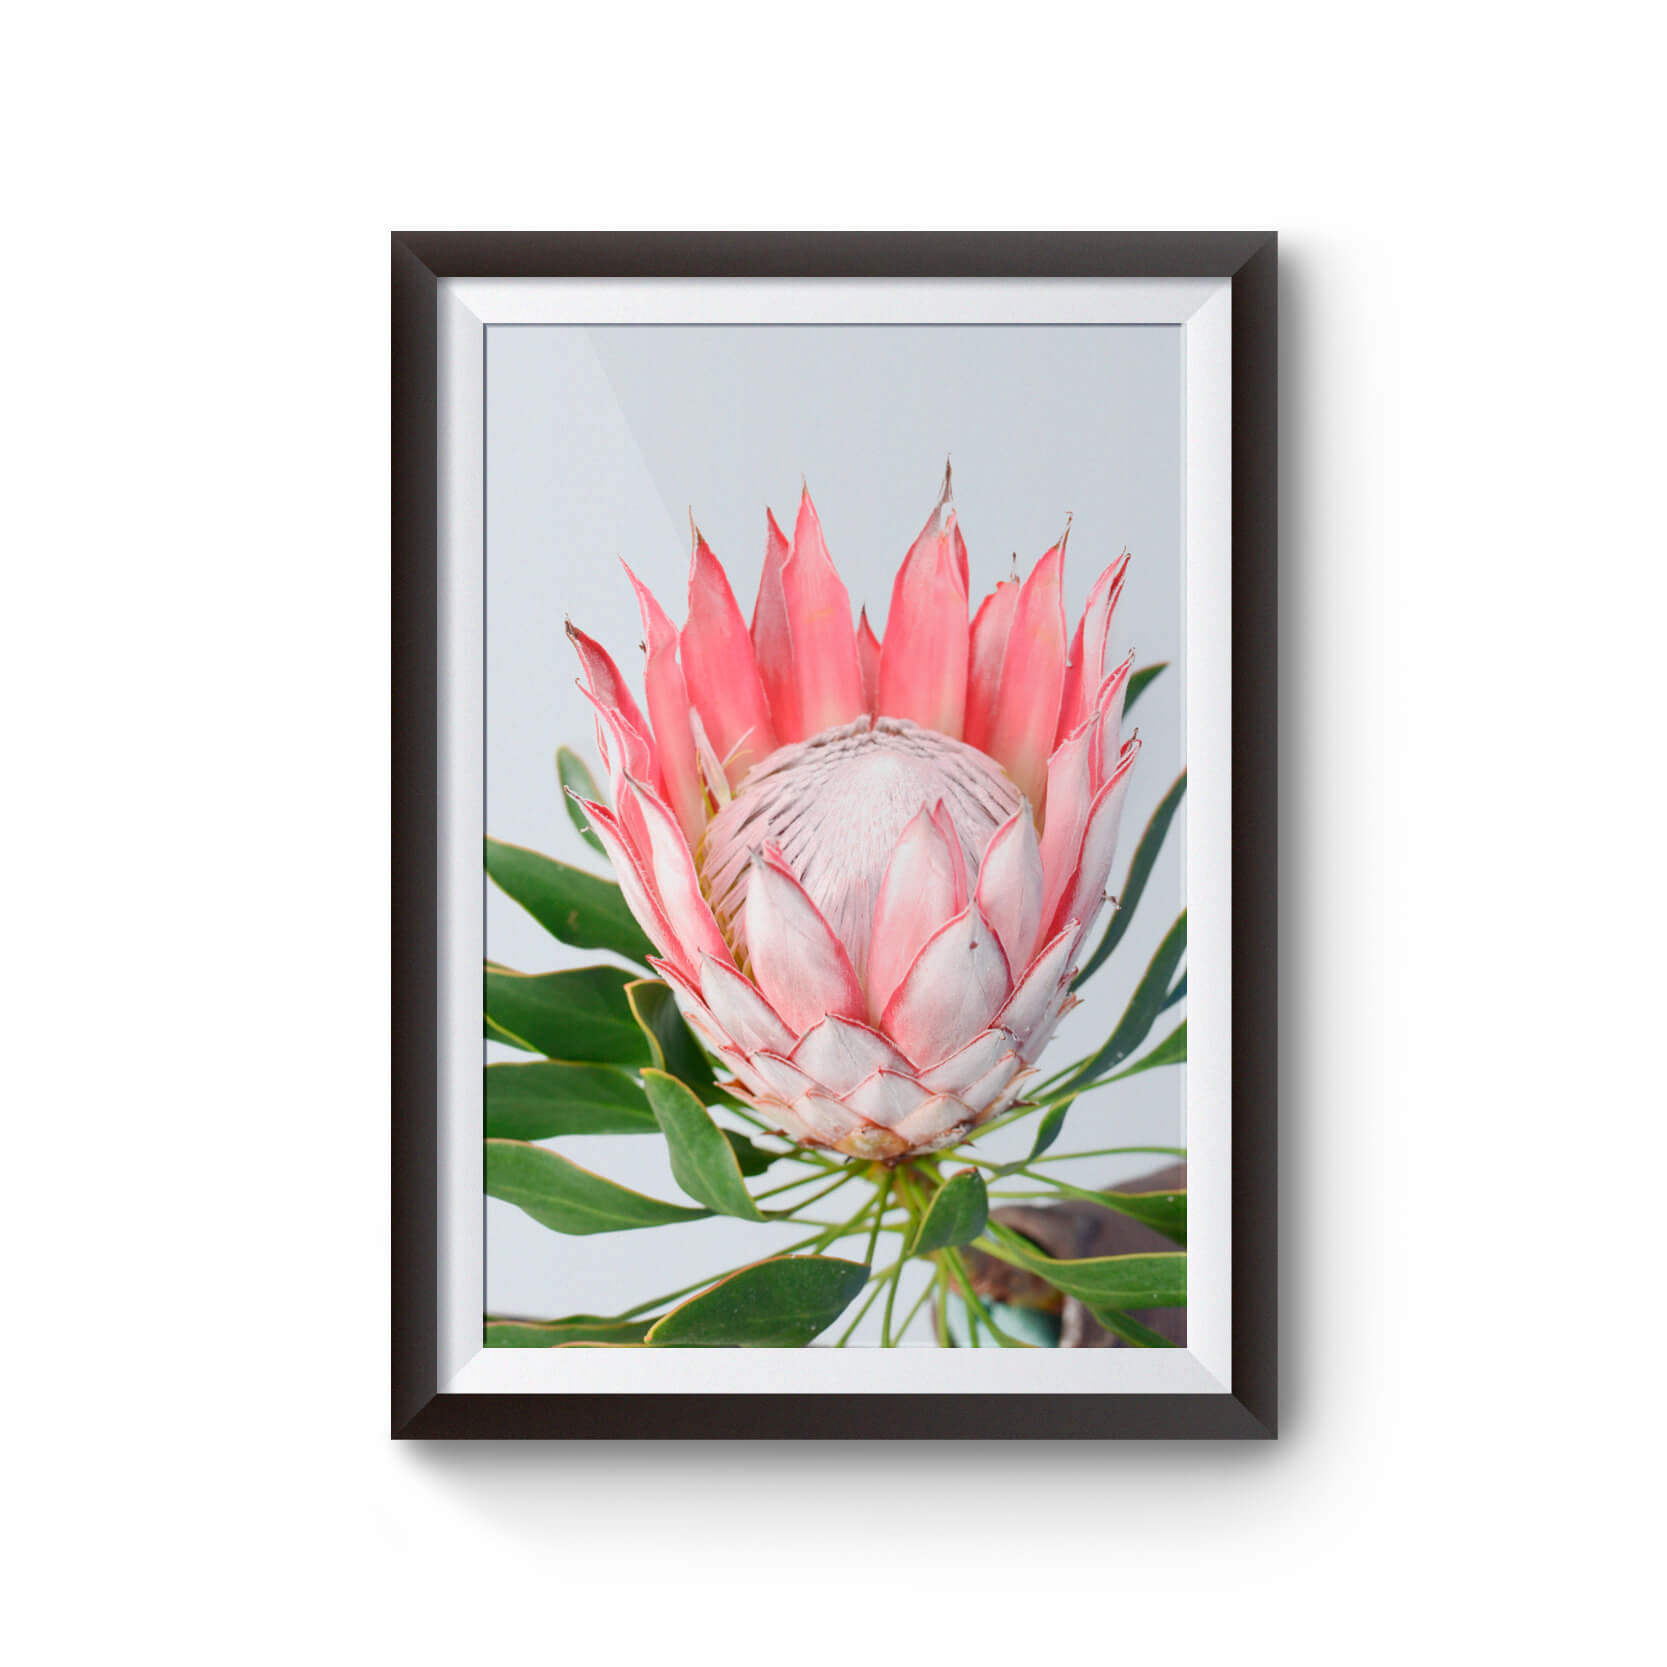 A framed printed poster of a protea